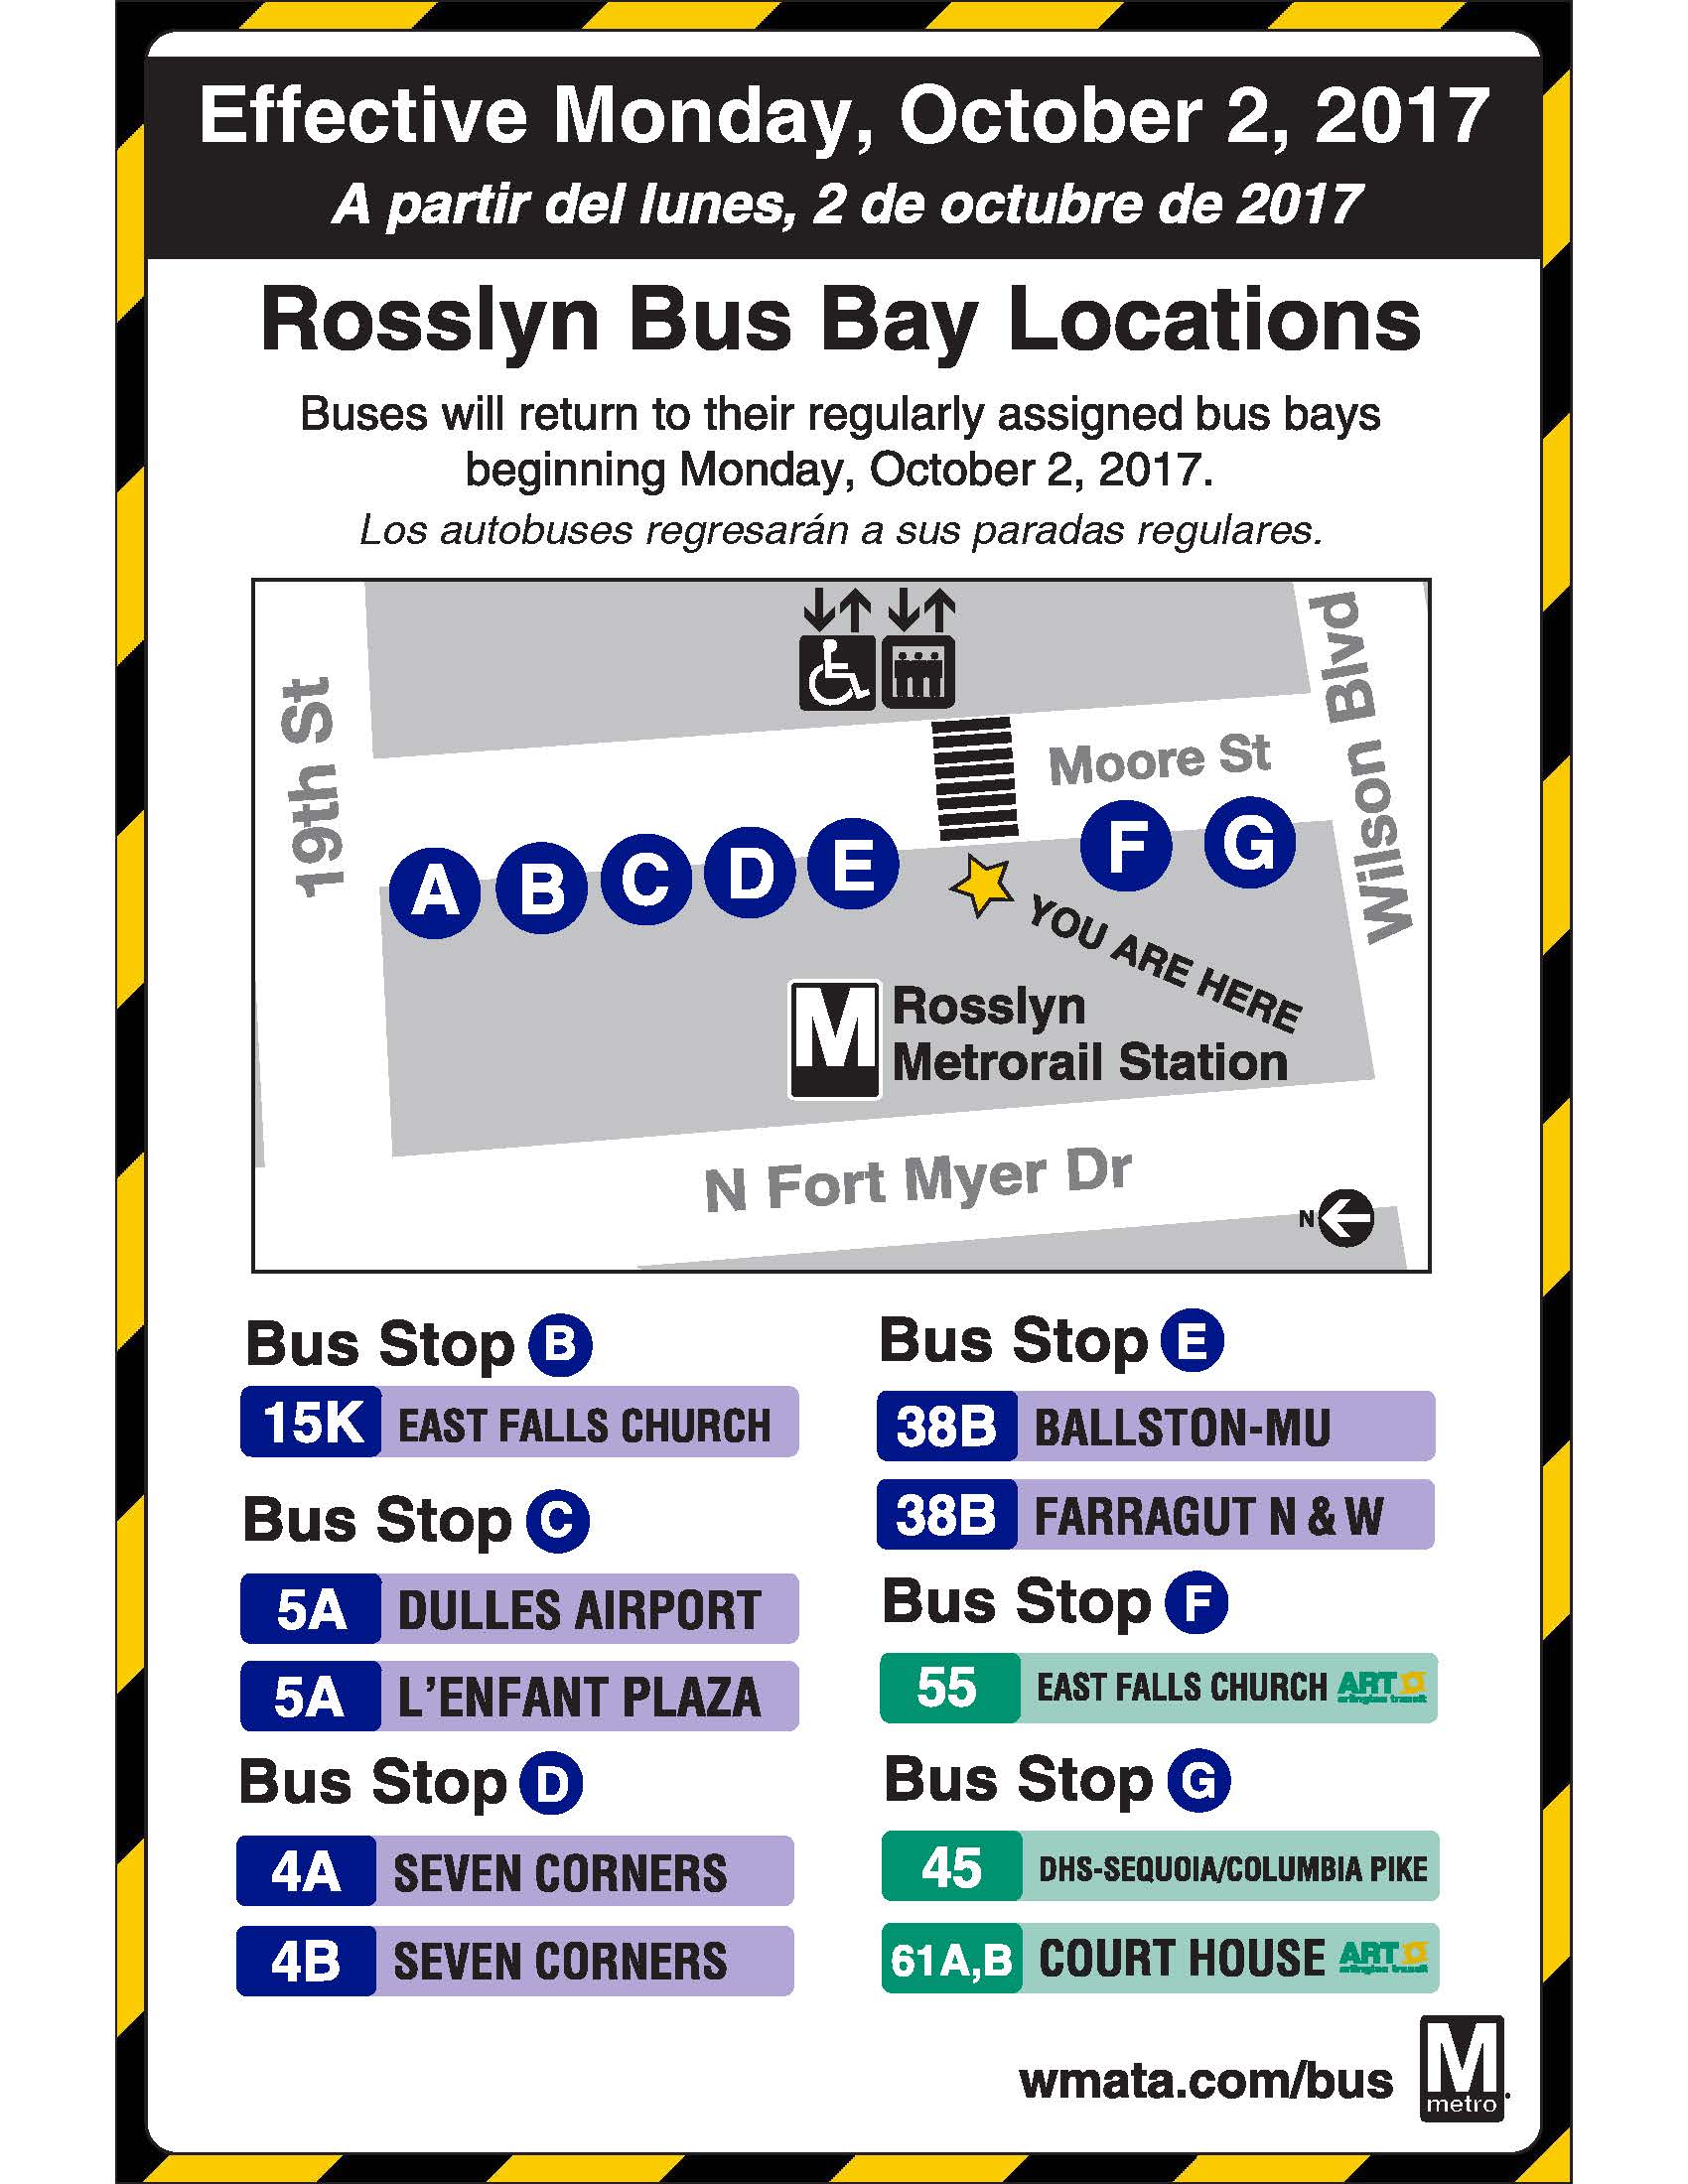 Rosslyn Bus Bays Return to Original Assignments 